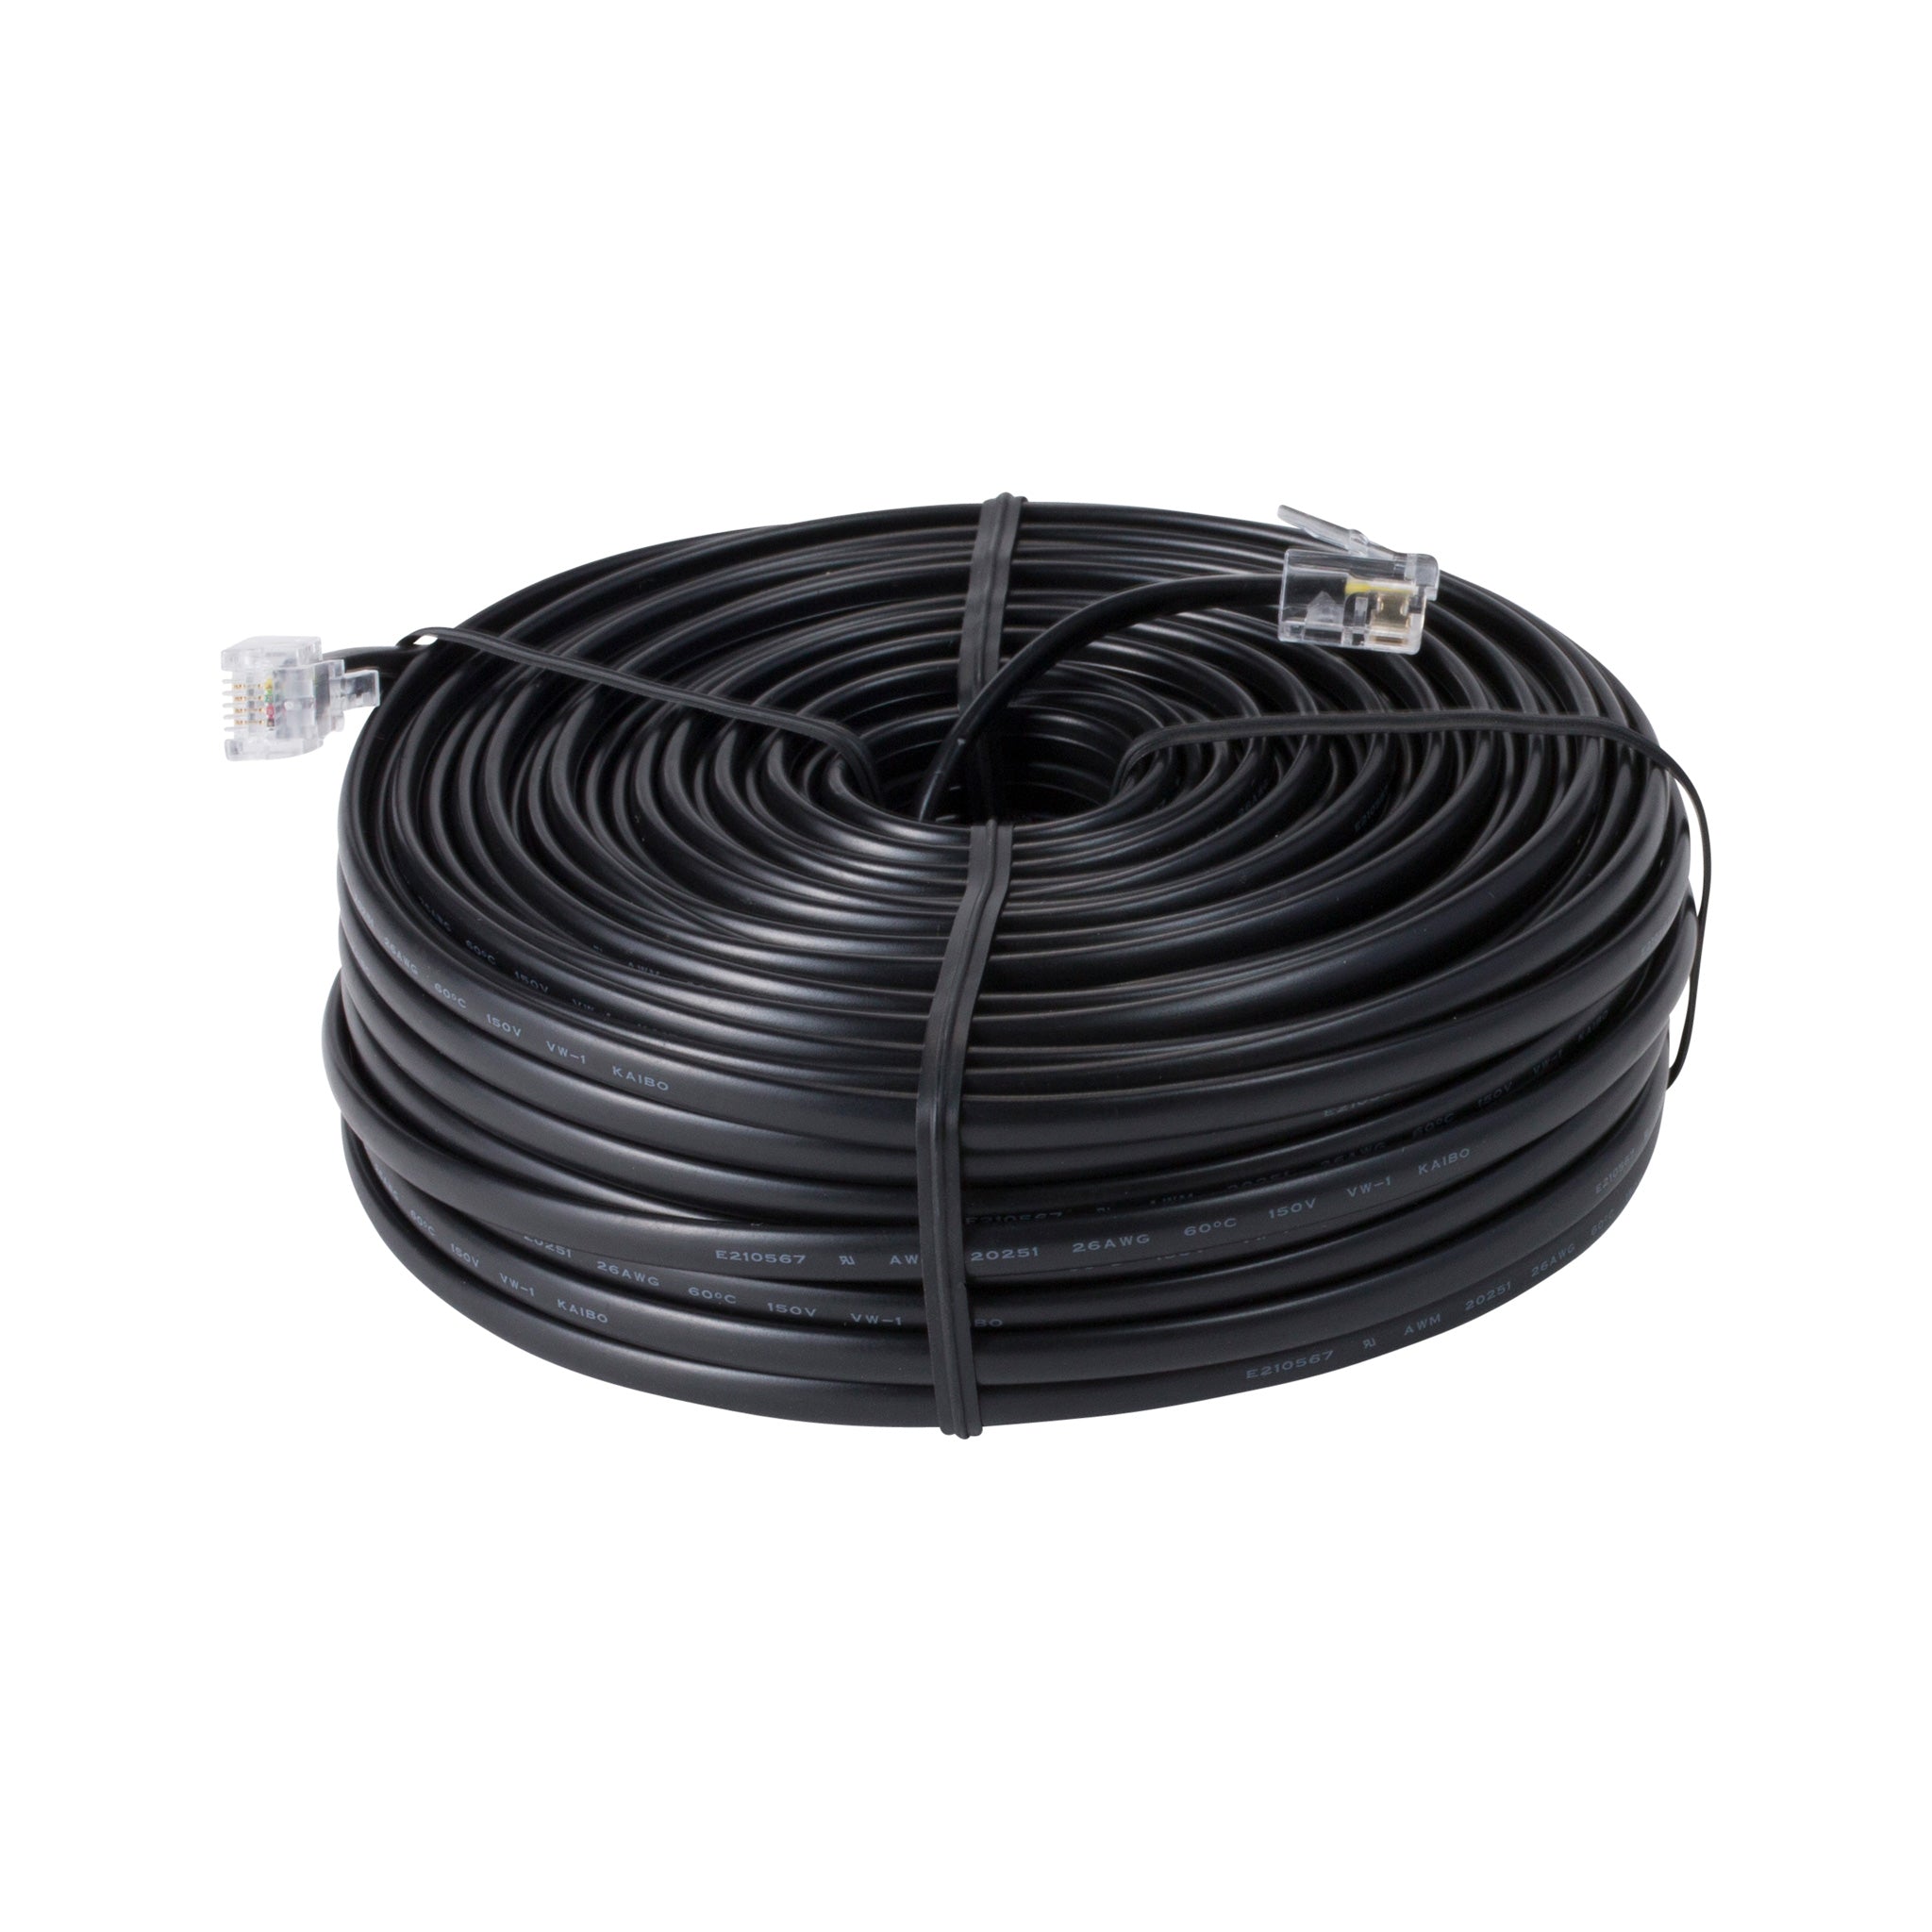 Standard 4-Conductor Cable, 100' (30 m) - SKU 7876-100